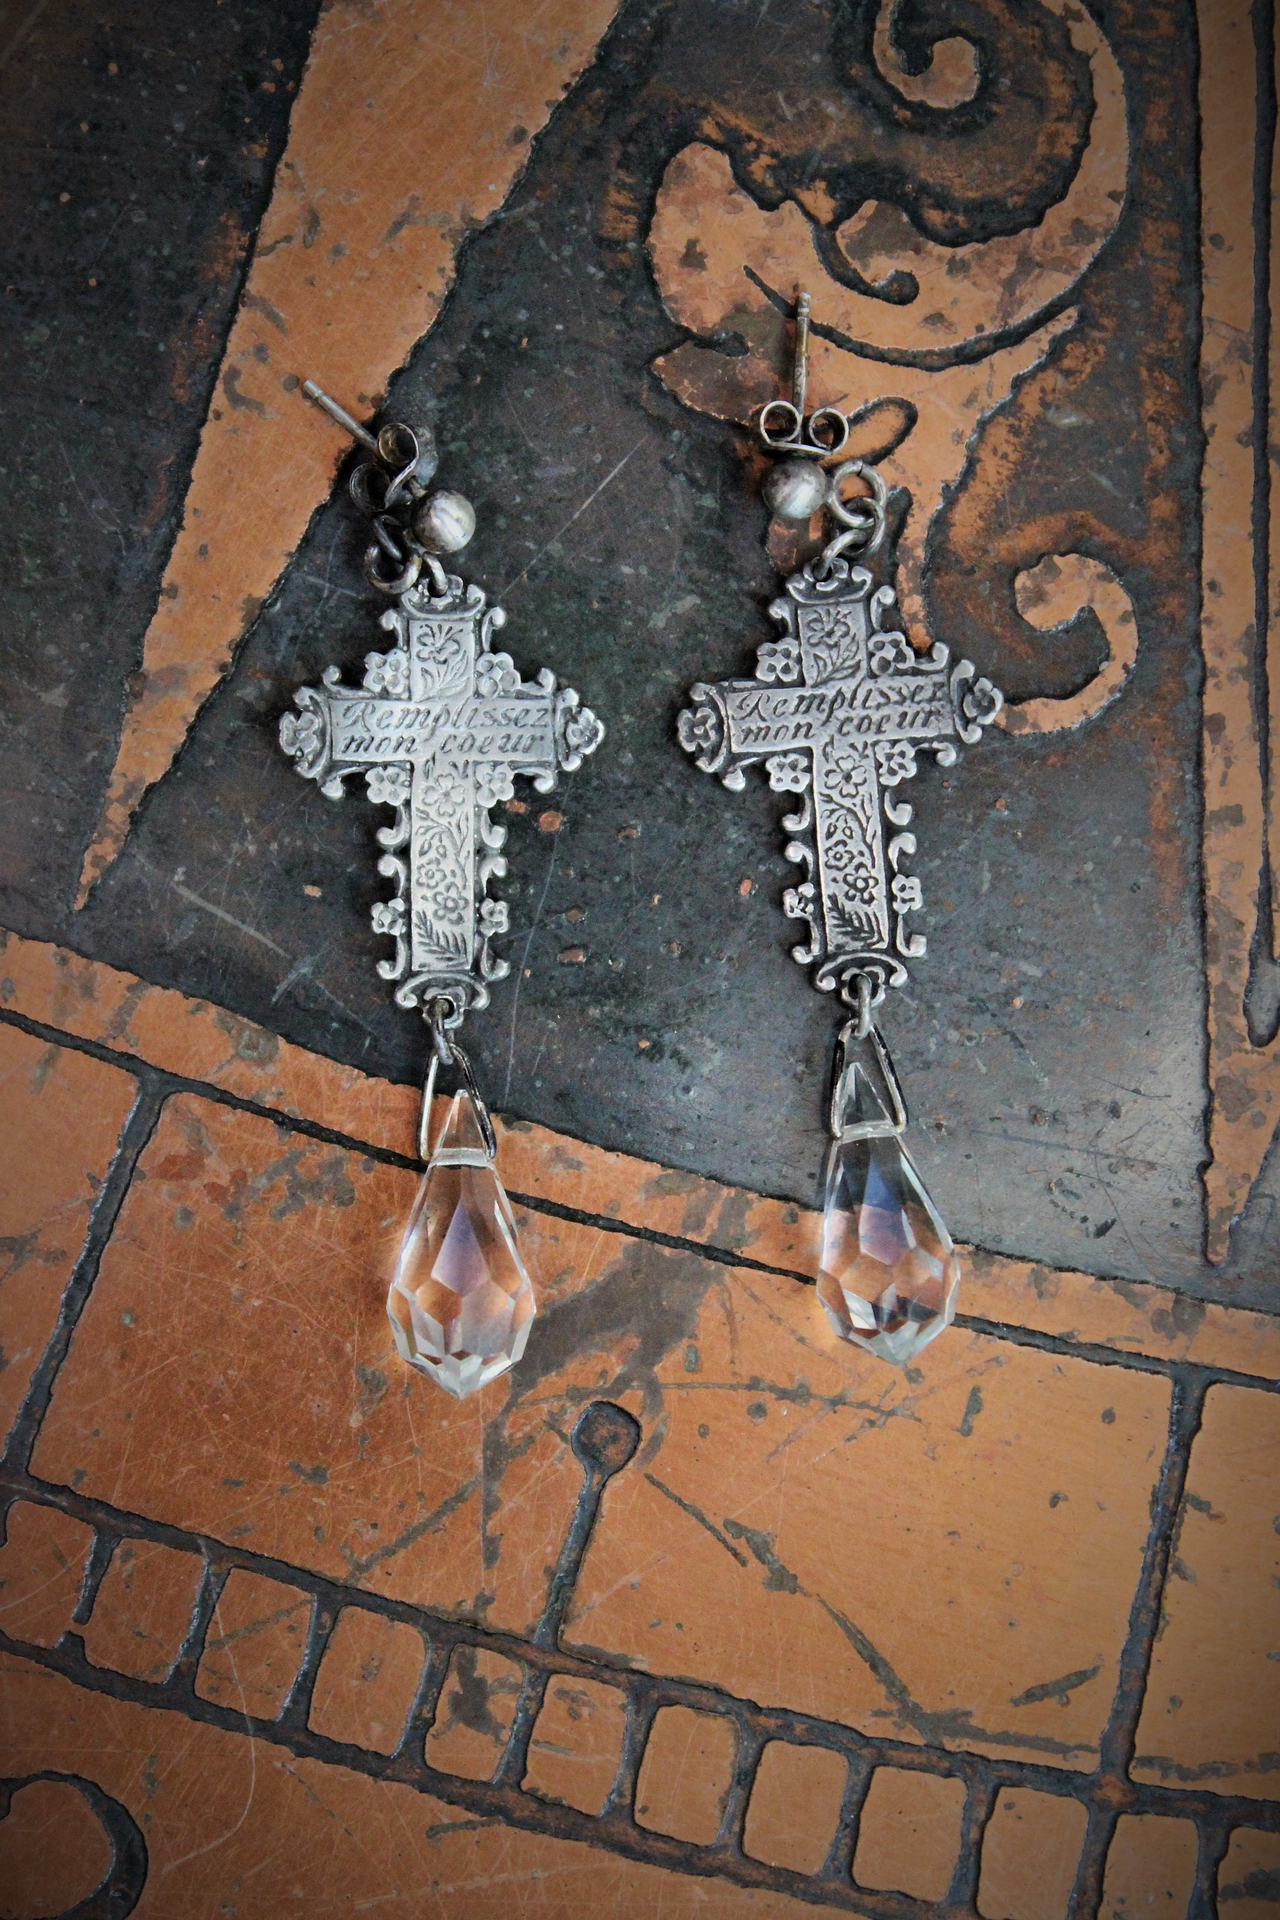 Fill my Heart with your Love Earrings w/French Engraved Crosses, Antique Faceted Rock Crystal Tear Drops,Sterling Posts